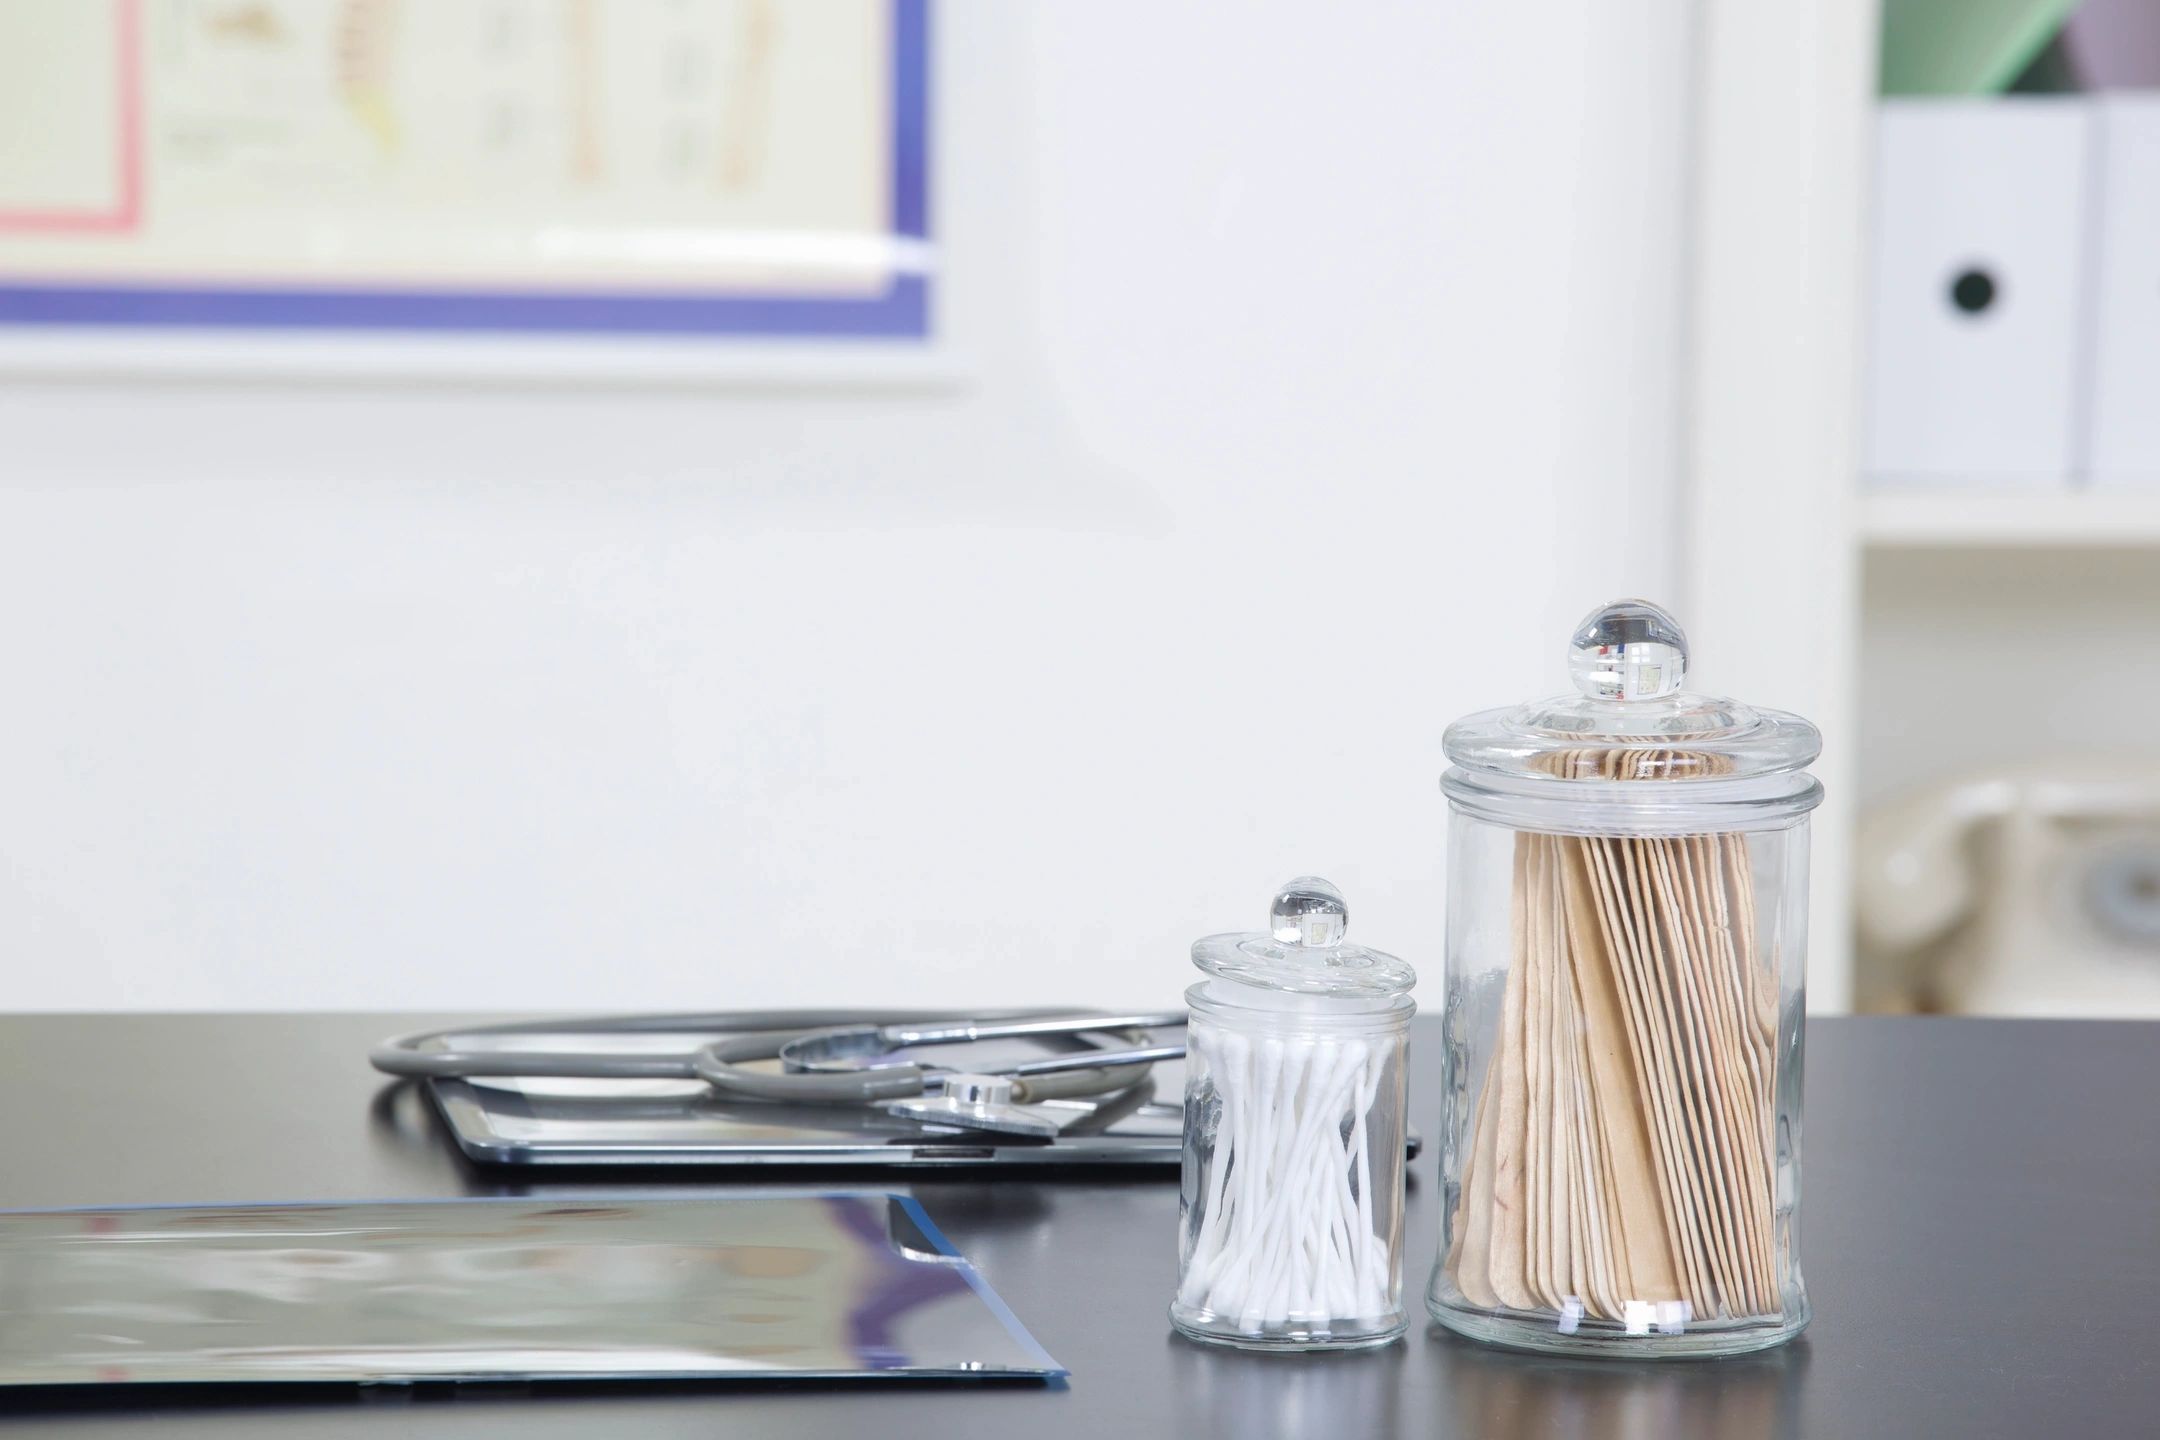 stethoscope, cotton swabs and tongue depressors sitting on a desk